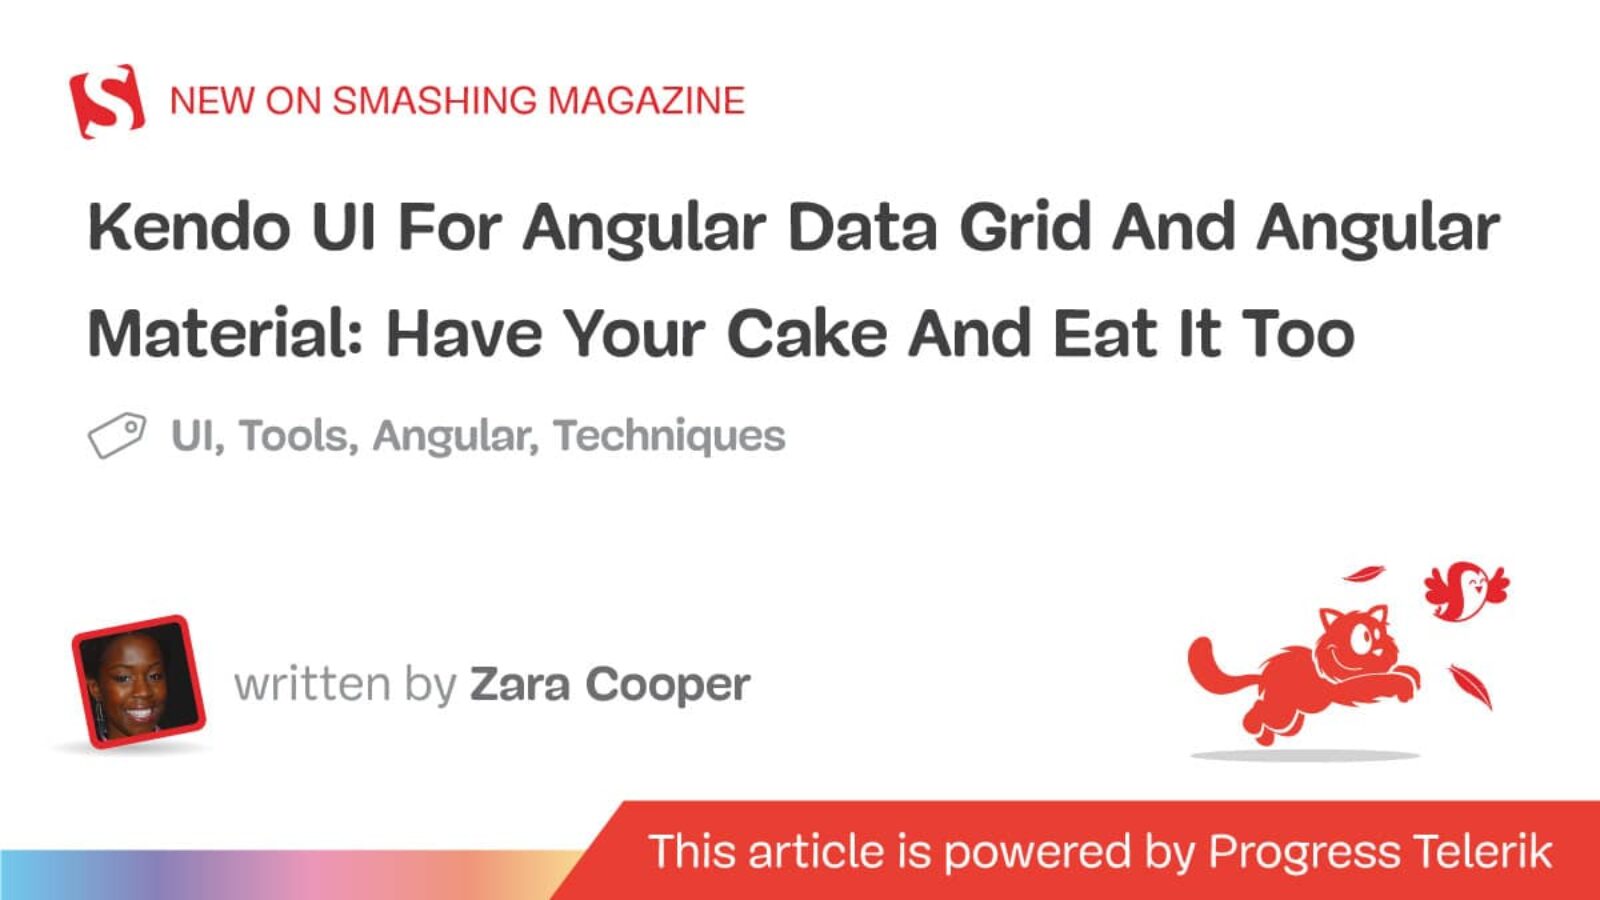 Kendo UI For Angular Knowledge Grid And Angular Materials: Have Your Cake And Eat It Too